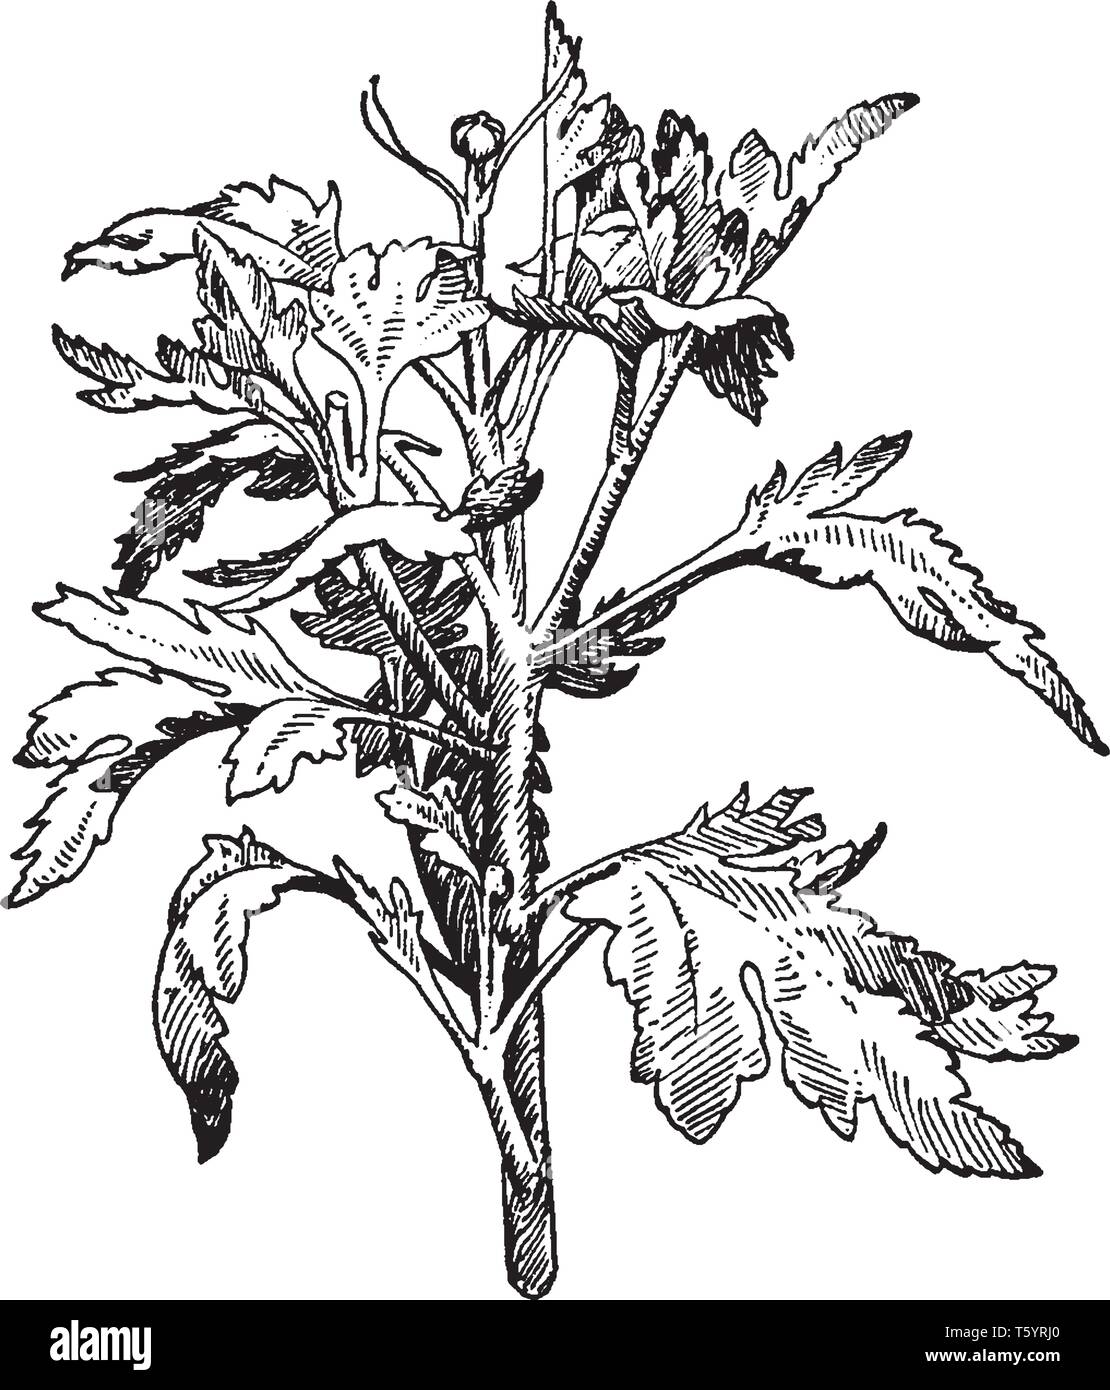 The image shows a crown bud of Chrysanthemum. These flower buds initiate easily and develop rapidly. The leaves are large and cone shaped, vintage lin Stock Vector